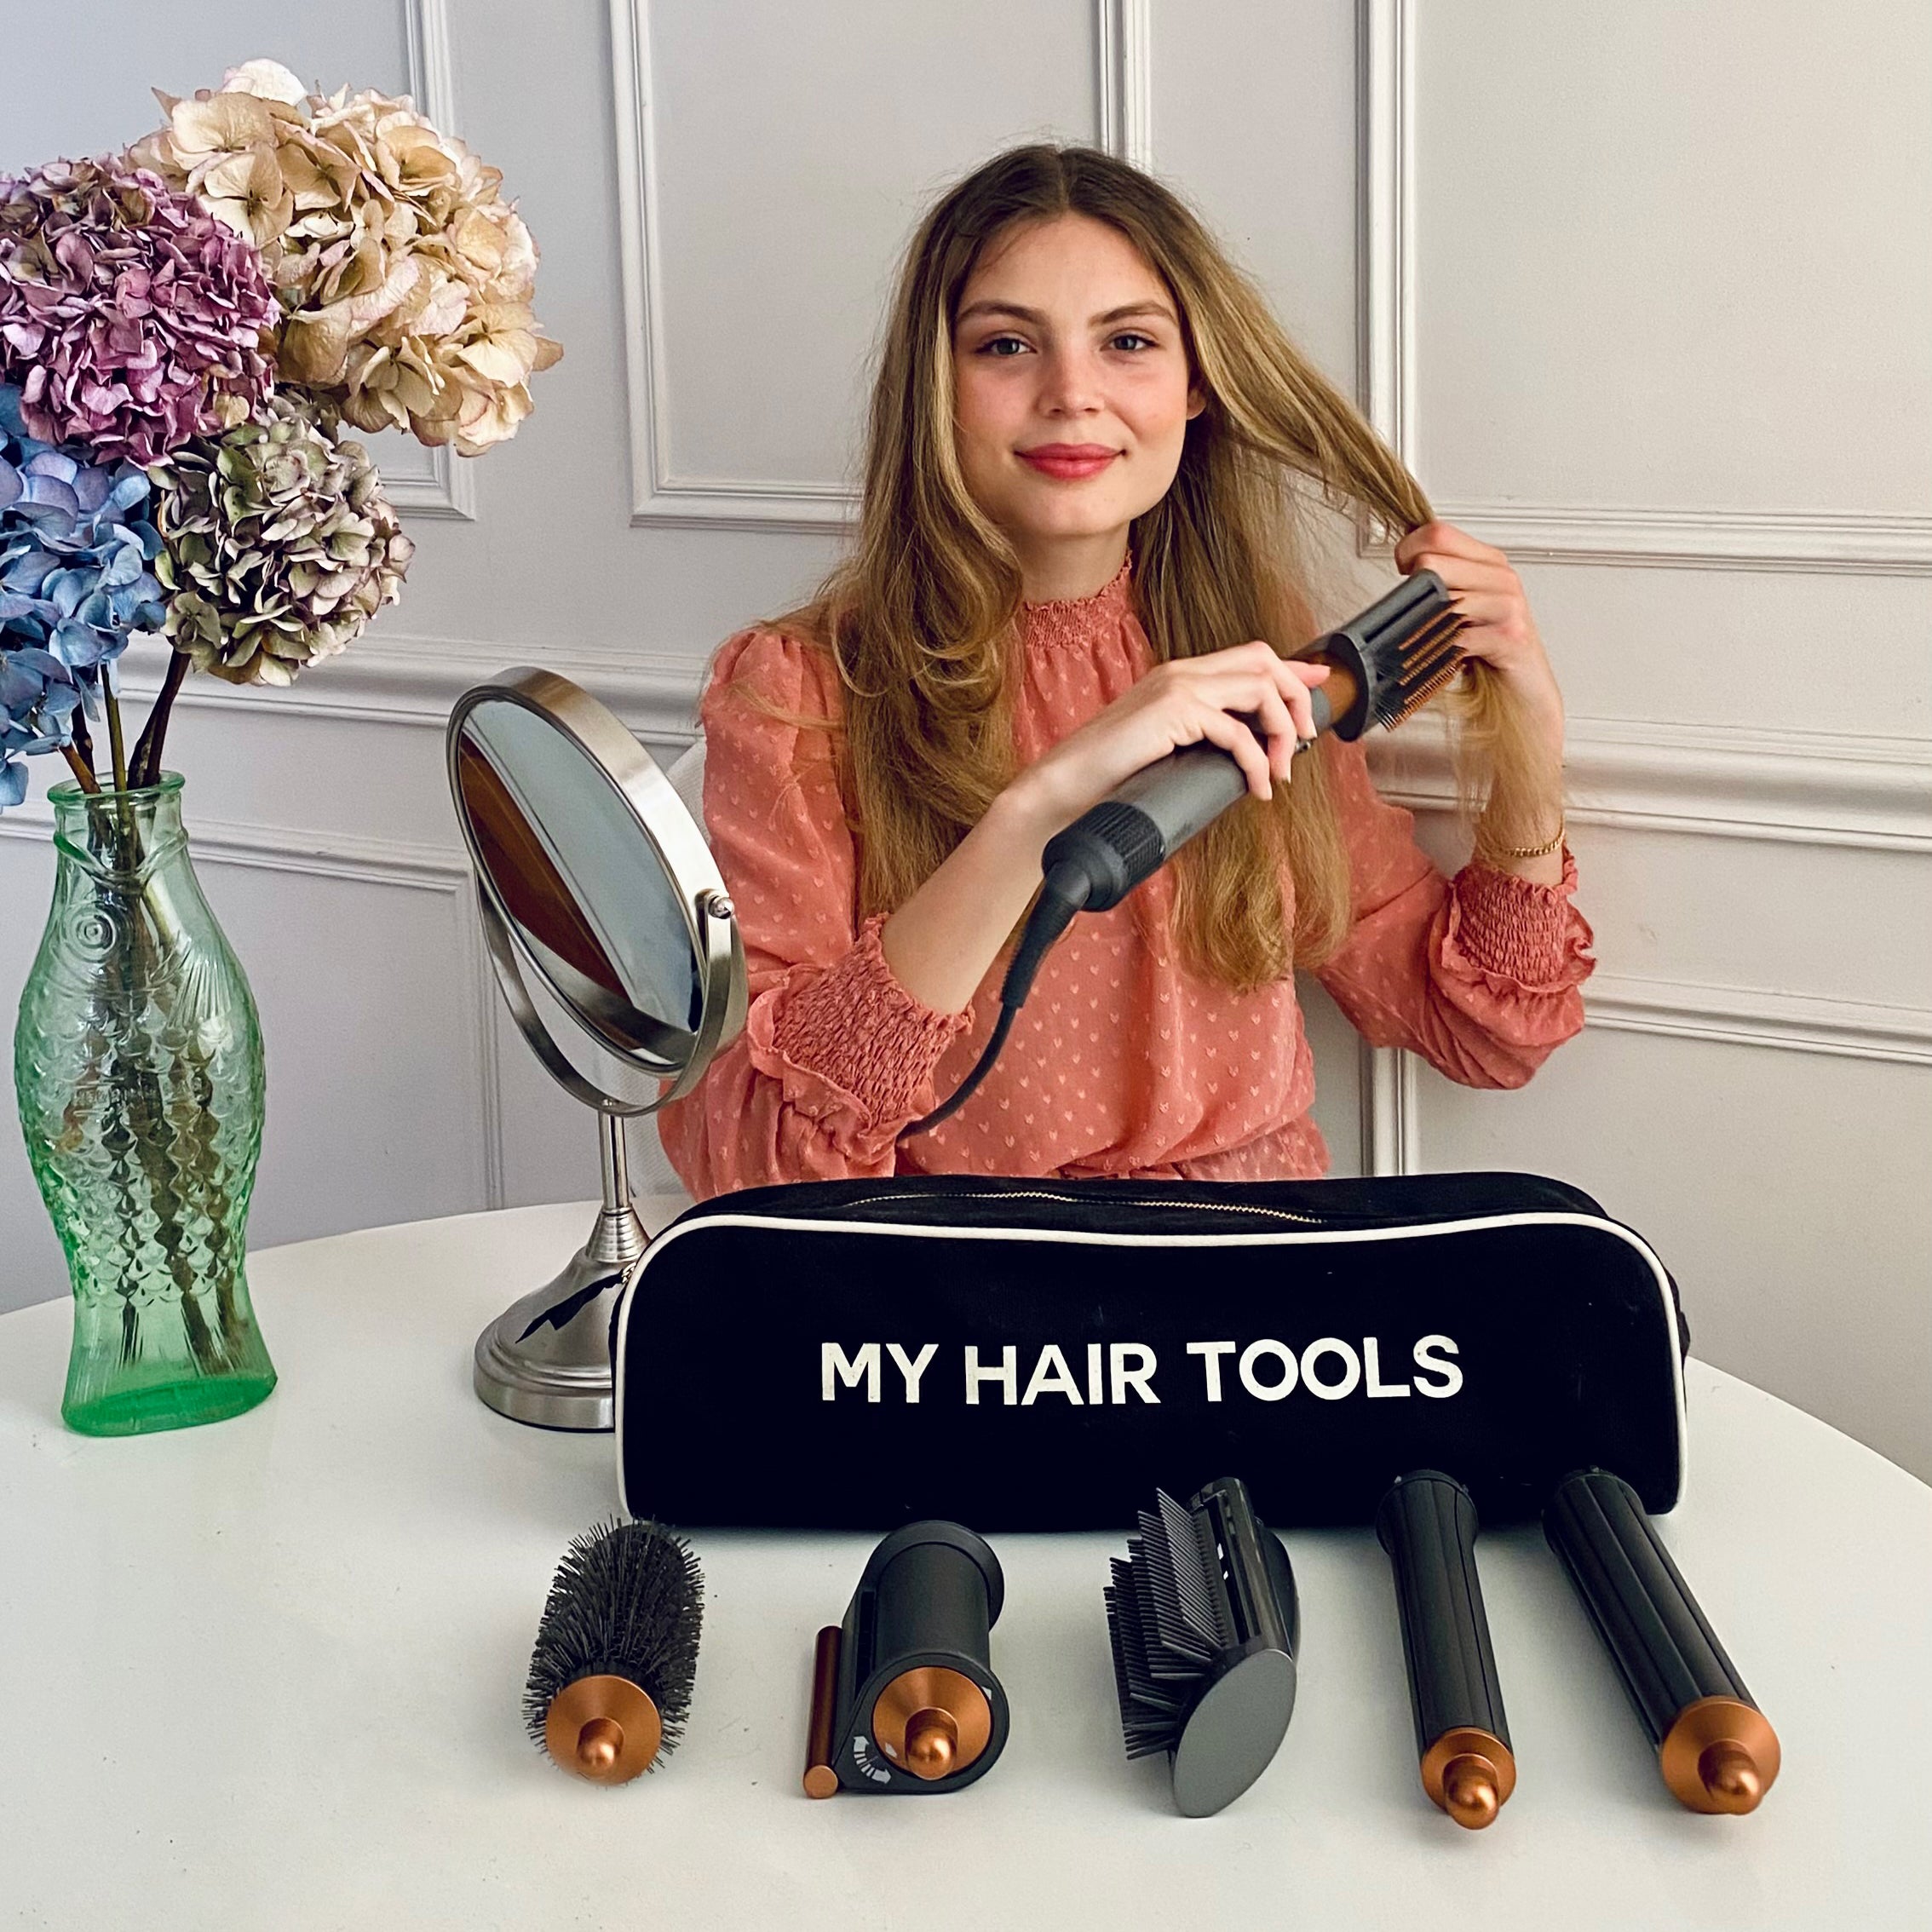 Meet Your New Travel Buddy – The Roomy Hair Tools Travel Case!